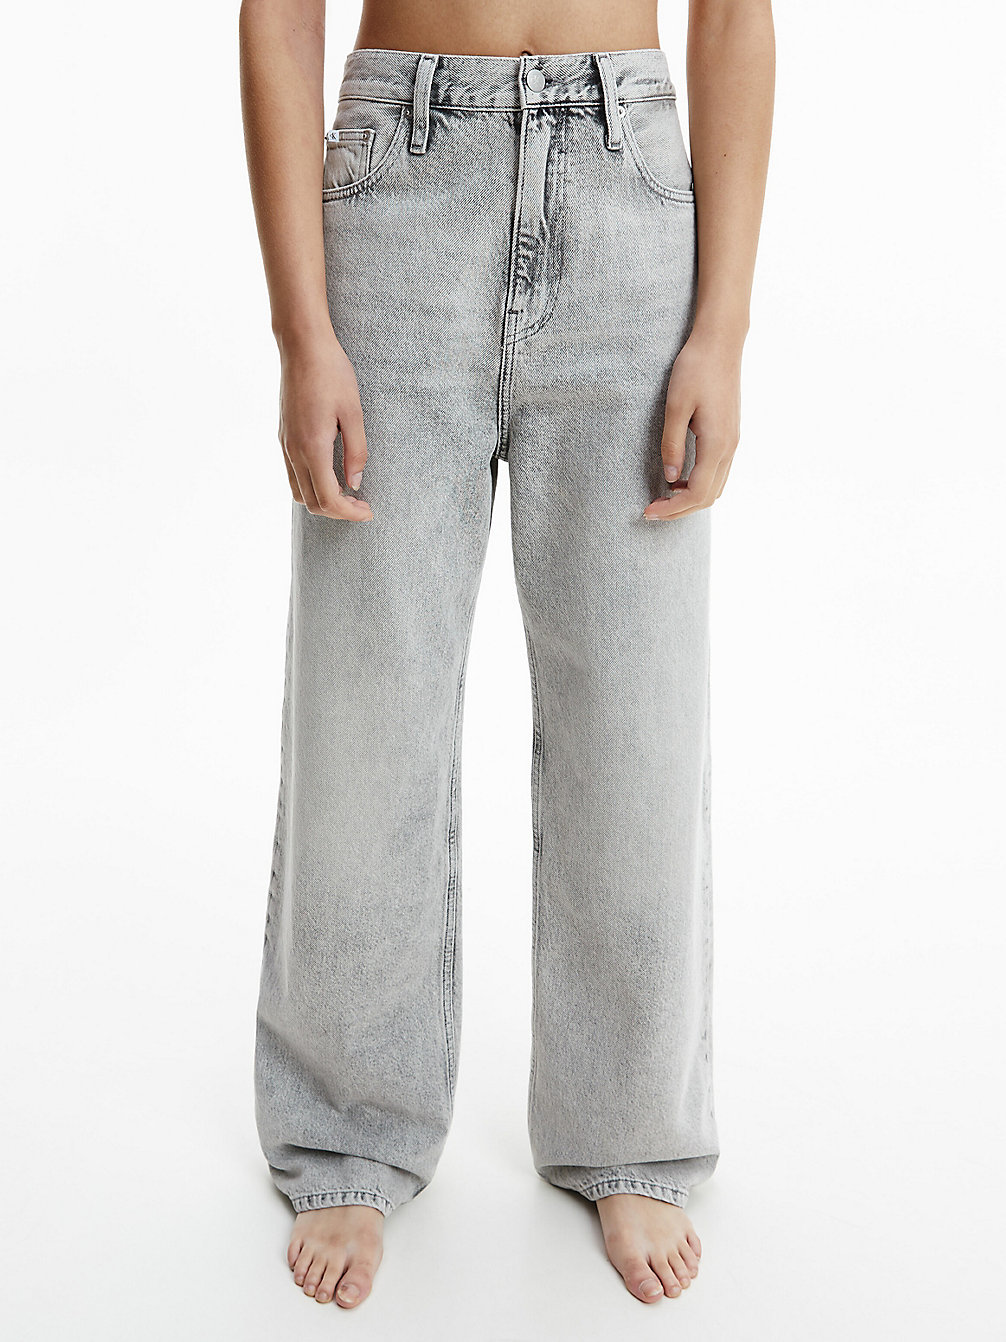 High Rise Relaxed Jeans > DENIM GREY > undefined mujer > Calvin Klein